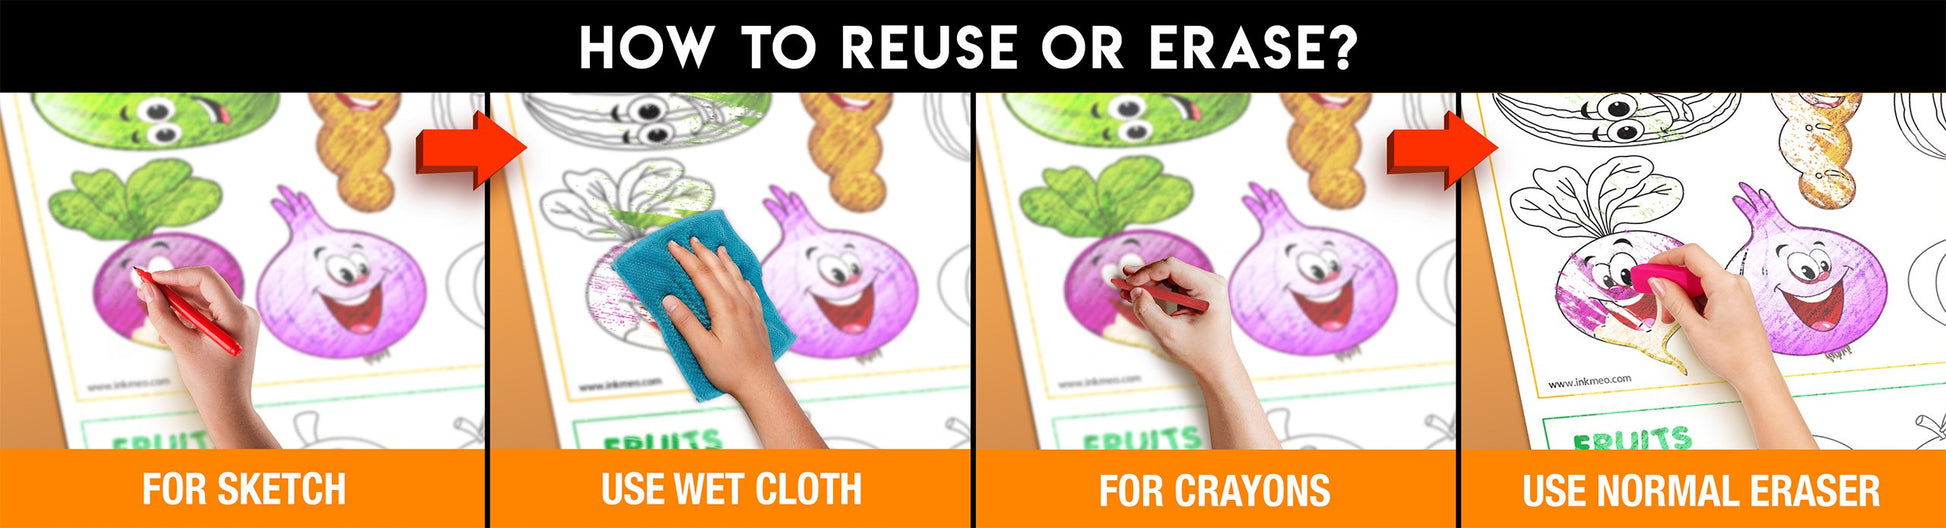 The image has an orange background with four pictures demonstrating how to reuse or erase: the first picture depicts sketching on the sheet, the second shows using a wet cloth to remove sketches, the third image displays crayons coloring on the sheet, and the fourth image illustrates erasing crayons with a regular eraser.